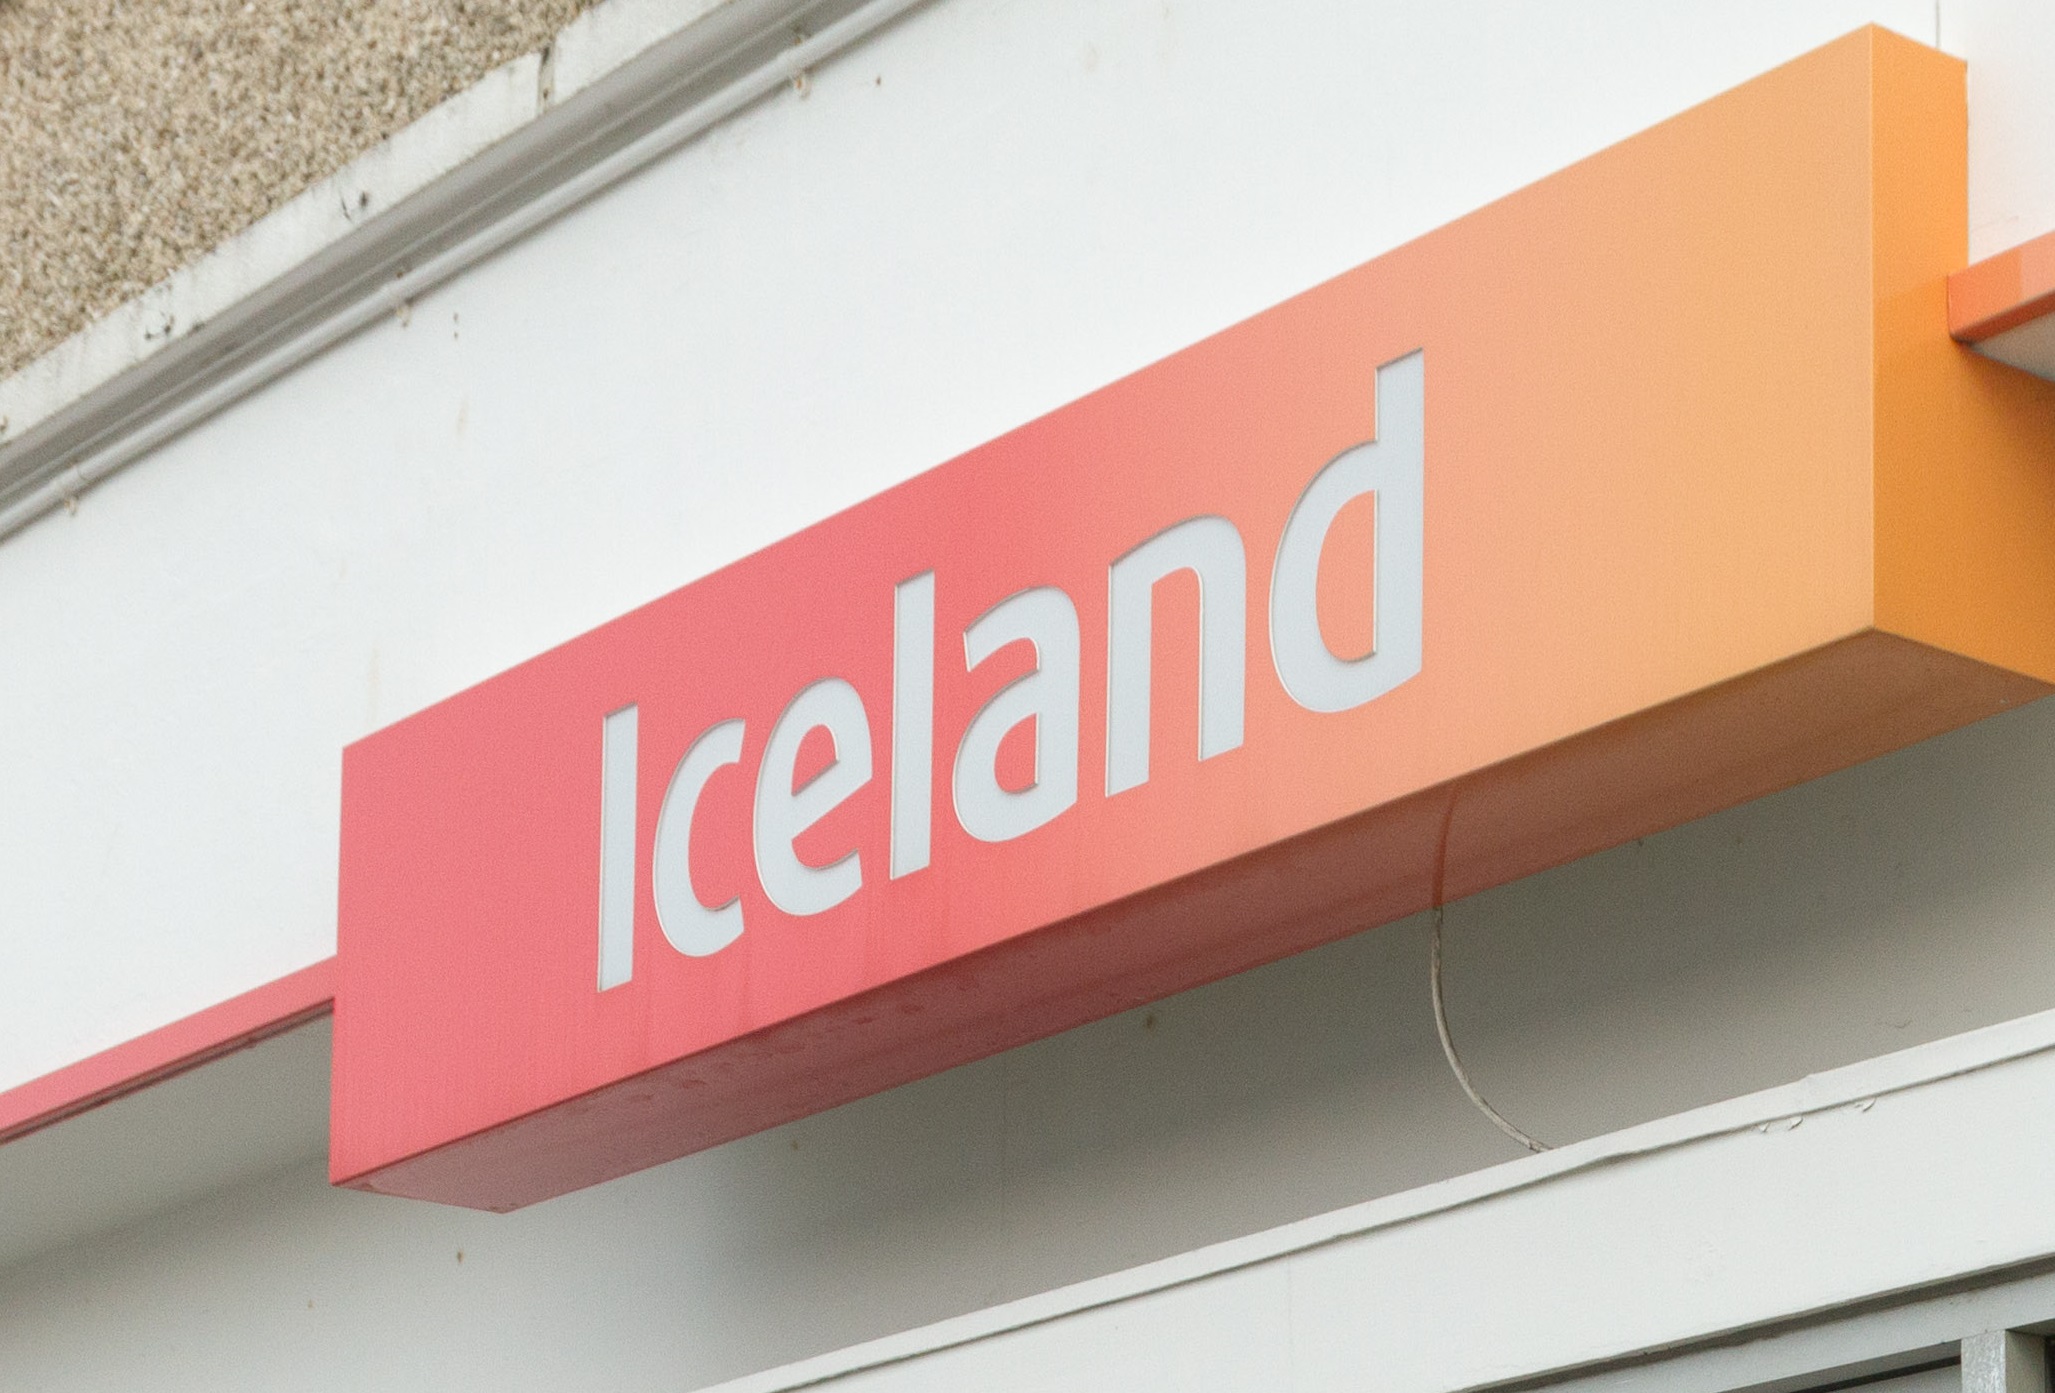 Iceland copyright battle could ‘last years’